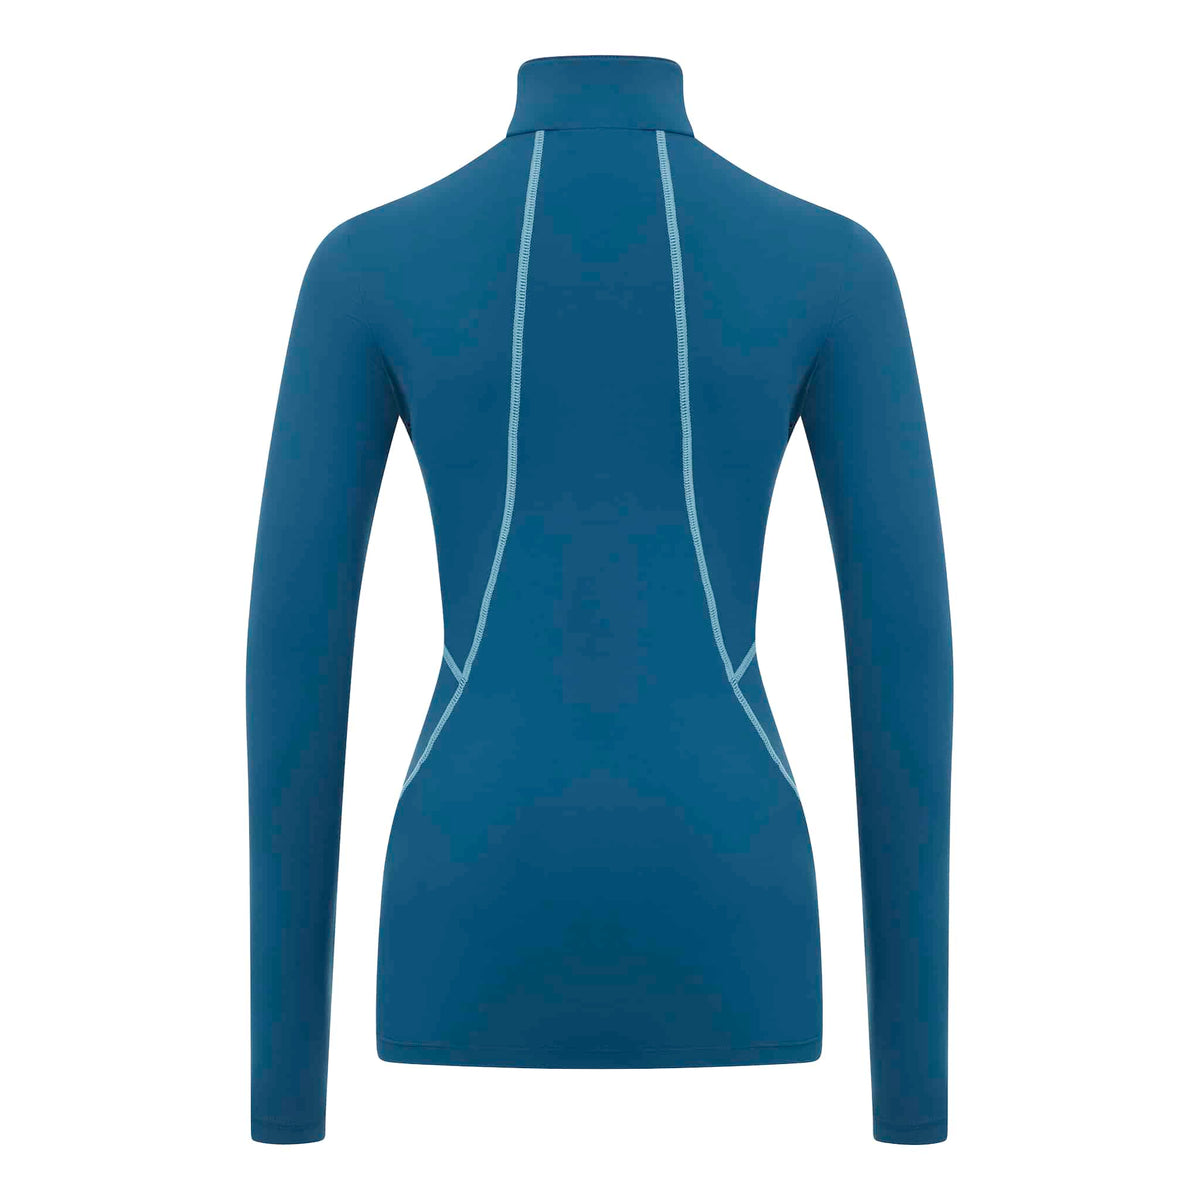 LeMieux Young Rider Base Layer